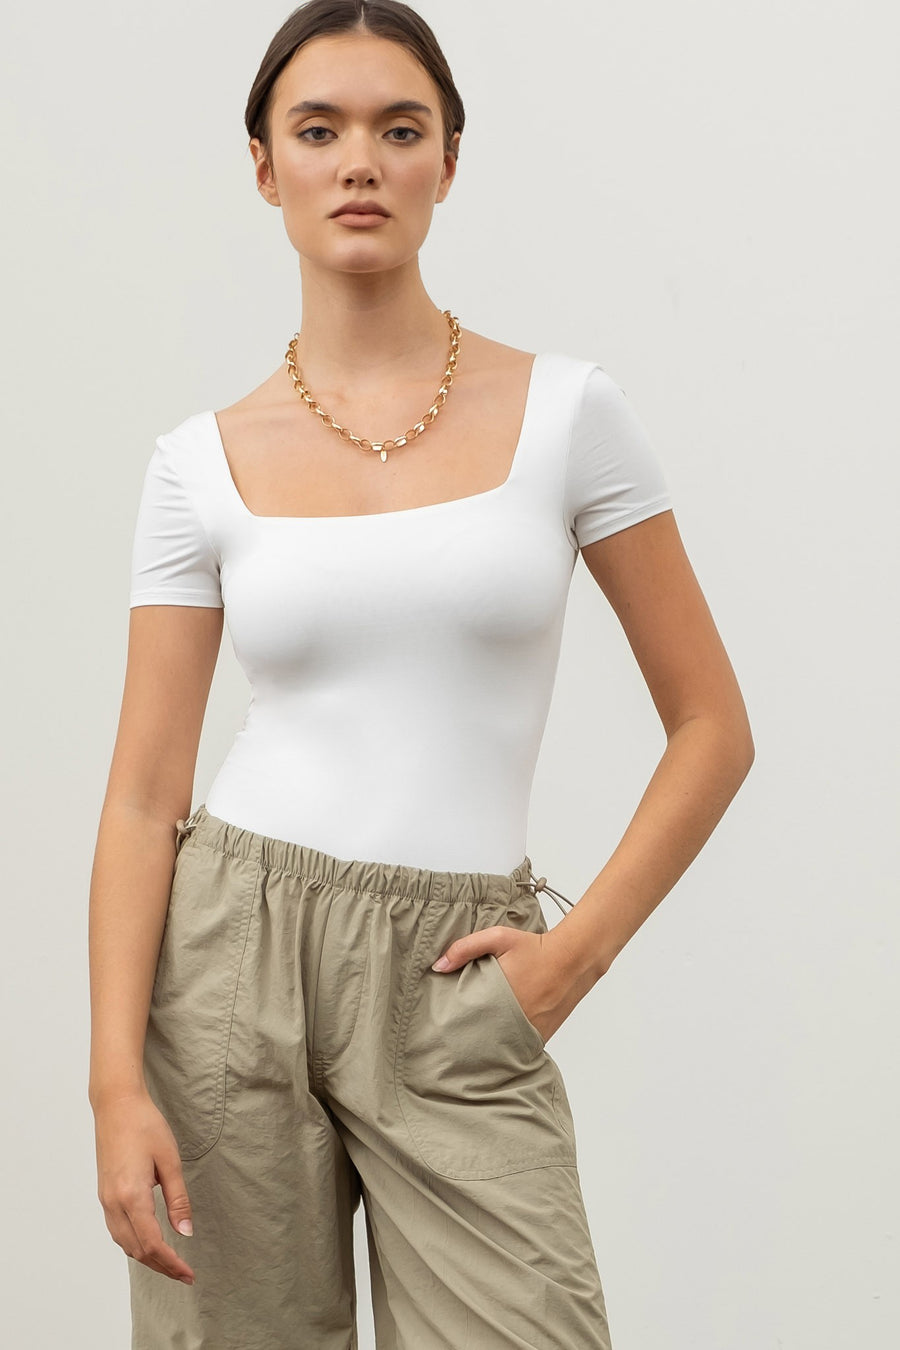 Featuring a square neck short sleeve bodysuit in the color white